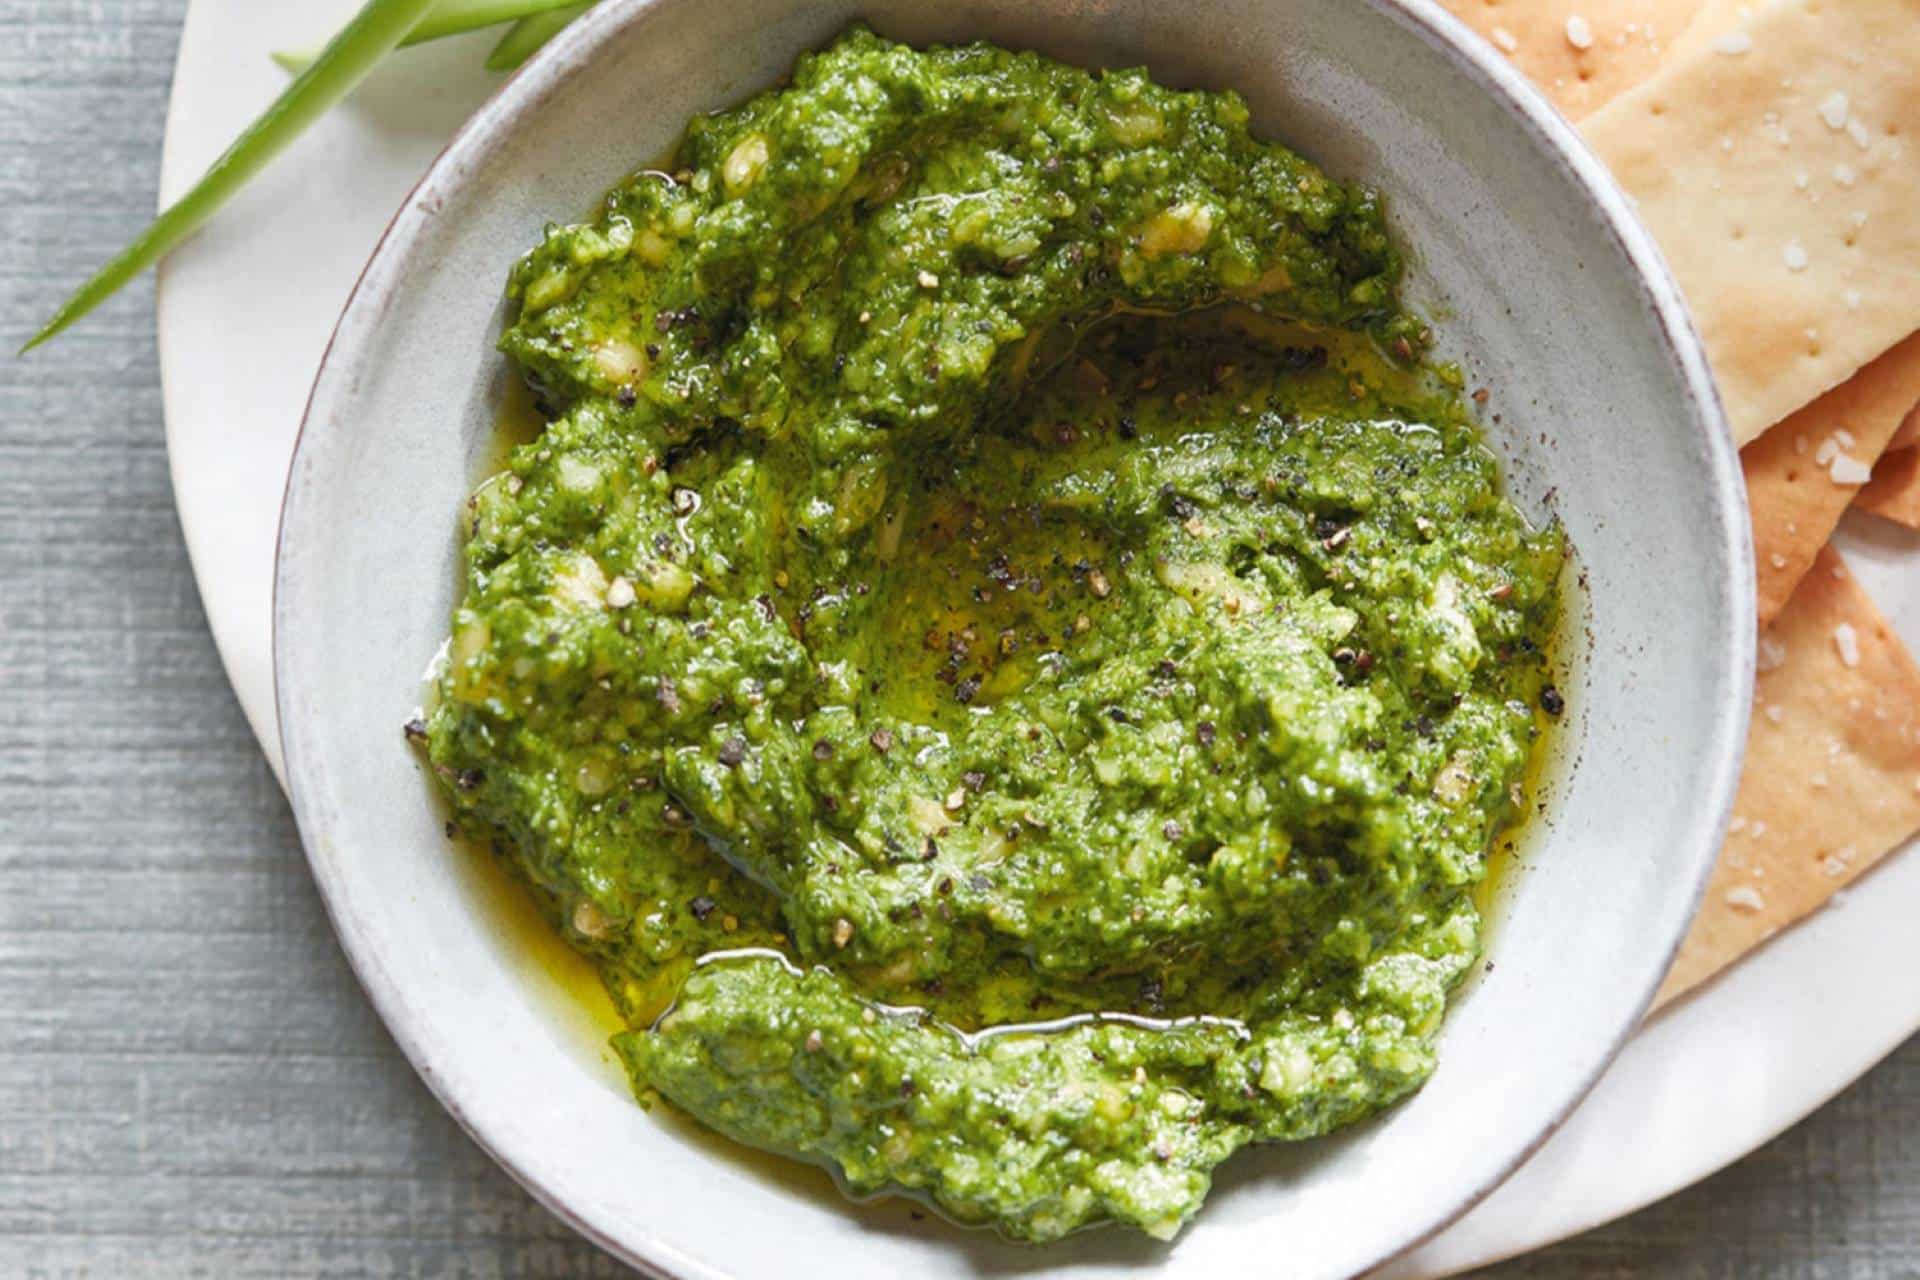 Dips, Spreads, Jams and Sauces: 15 Recipes To Wow At Your Next Dinner Party